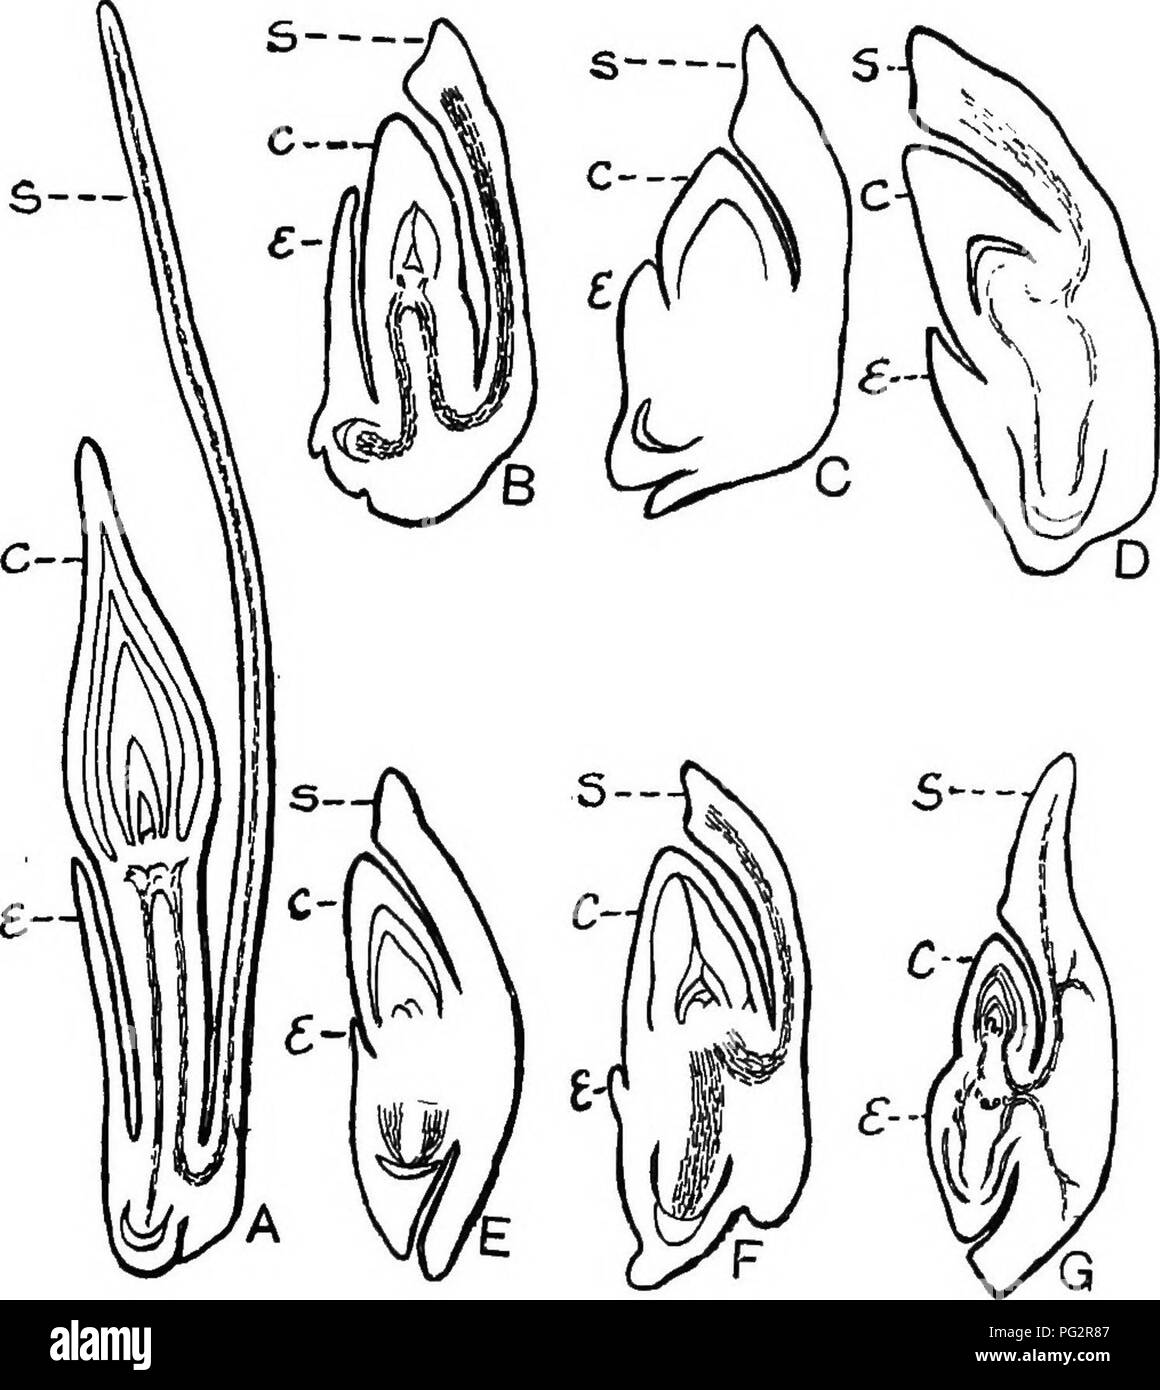 . Heredity and evolution in plants. Heredity; Plants. 224 HEREDITY AND EVOLUTION IN PLANTS senting 12 tribes, demonstrated the presence of the rudi- mentary cotyledon (epiblast) in 29 of the genera, repre-. FiG. 106.—Diagram of longitudinal sections of grass-embryos (Gram- ineas) to illustrate the rudimentary cotyledon {epiblast). A-C, E-G, redrawn from J. M. Coulter, after Bruns; D, from nature. A, Zizania acflatica; B, Leersia clandestina; C, Leptochloa arabica; D, Triticum vtd- gare; E, Spartina cynosuroides; F, Trilicum vulgare; G, Zea Mays; i, scutellum; c, coleoptile; ii, epiblast. senti Stock Photo